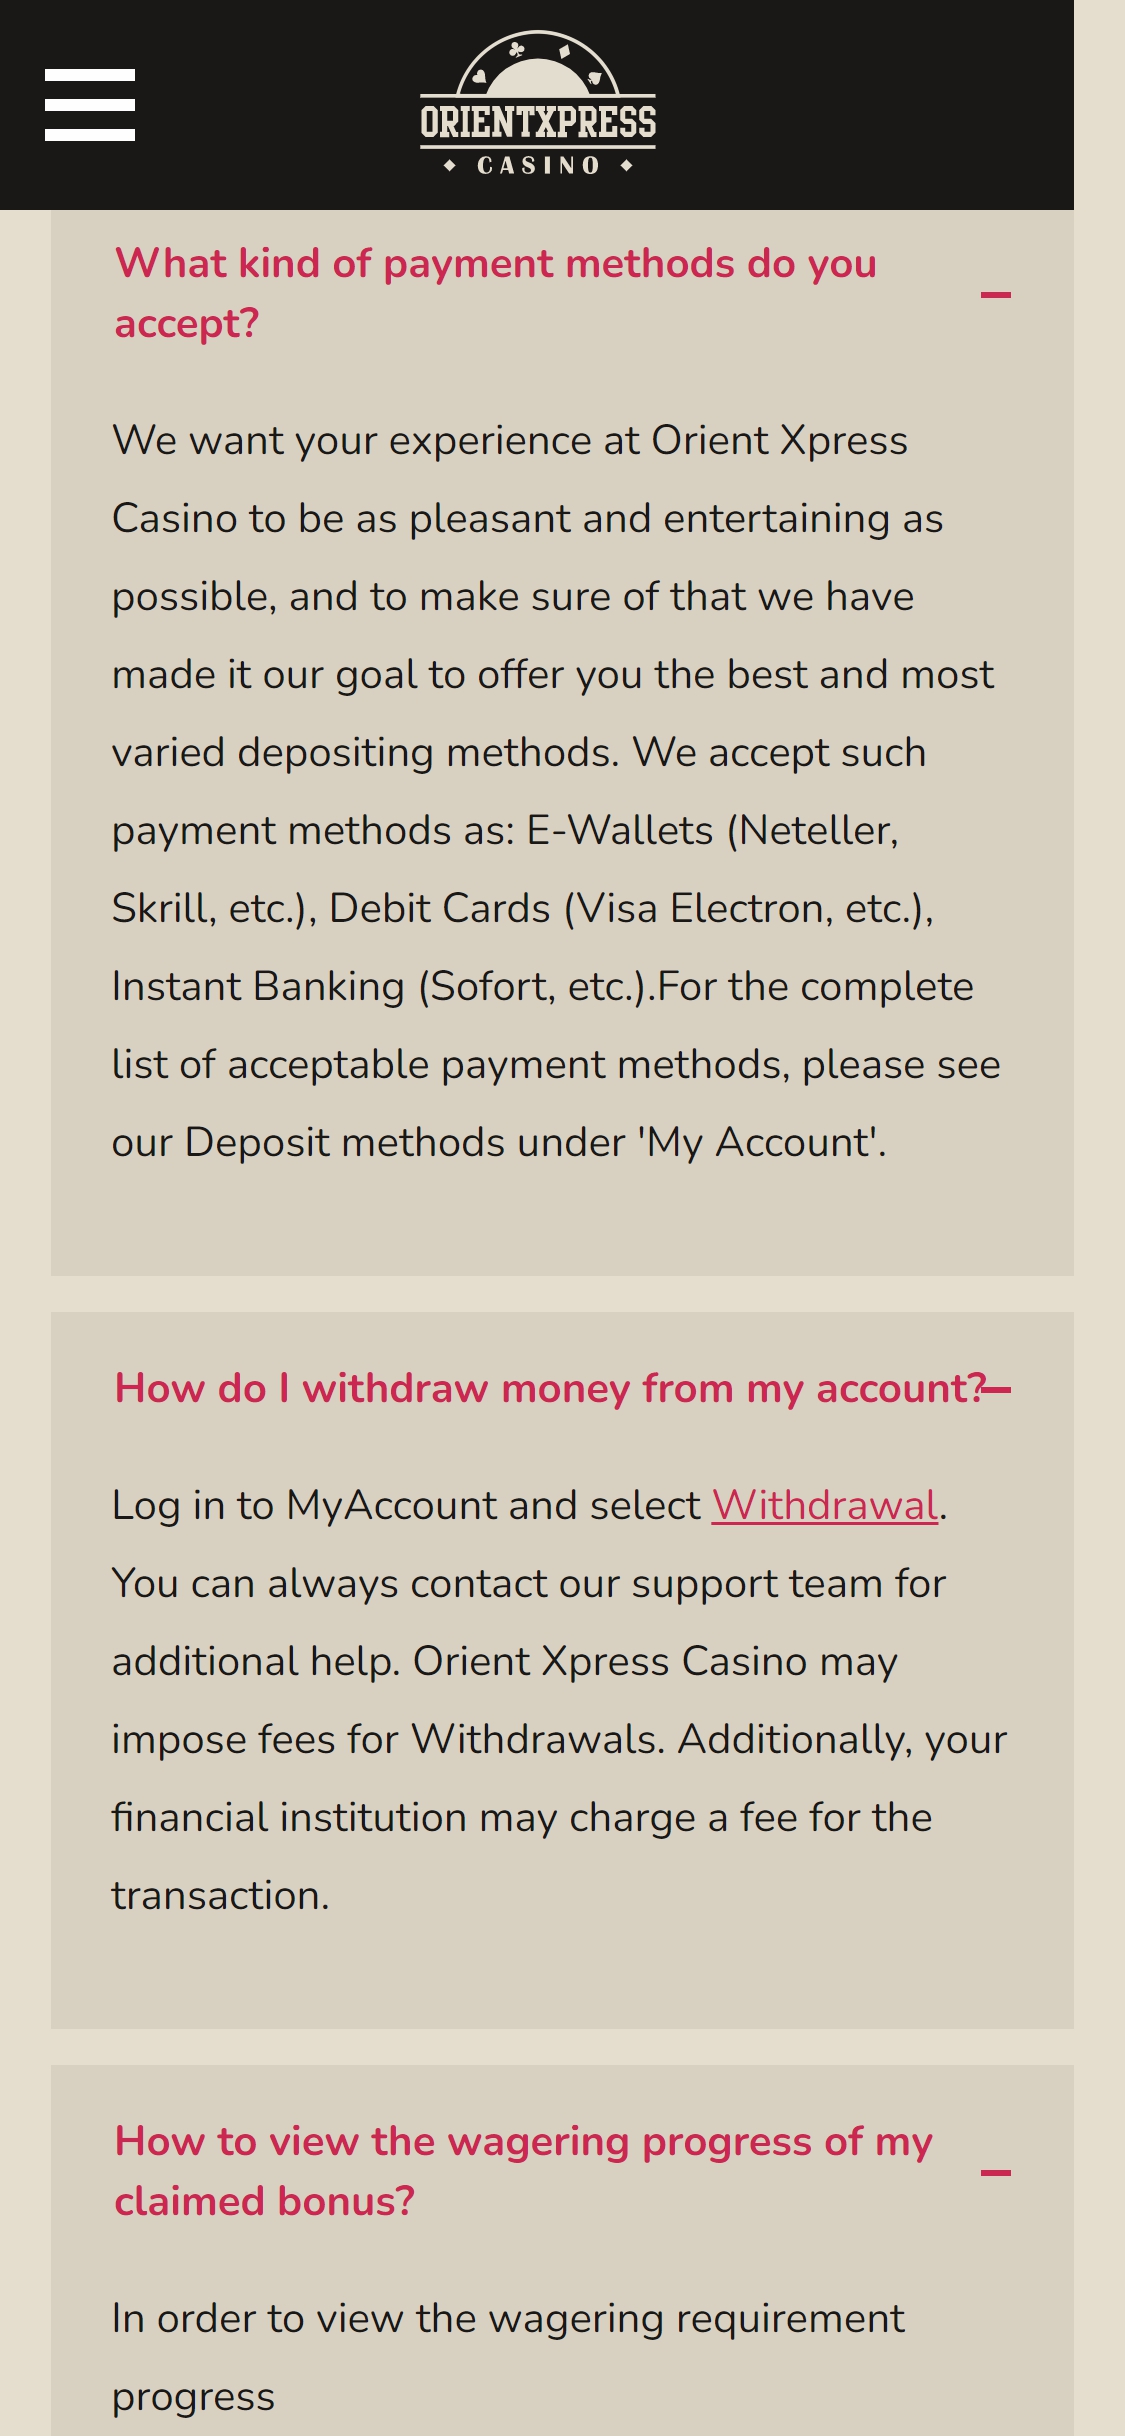 Orient Xpress Casino Mobile Payment Methods Review